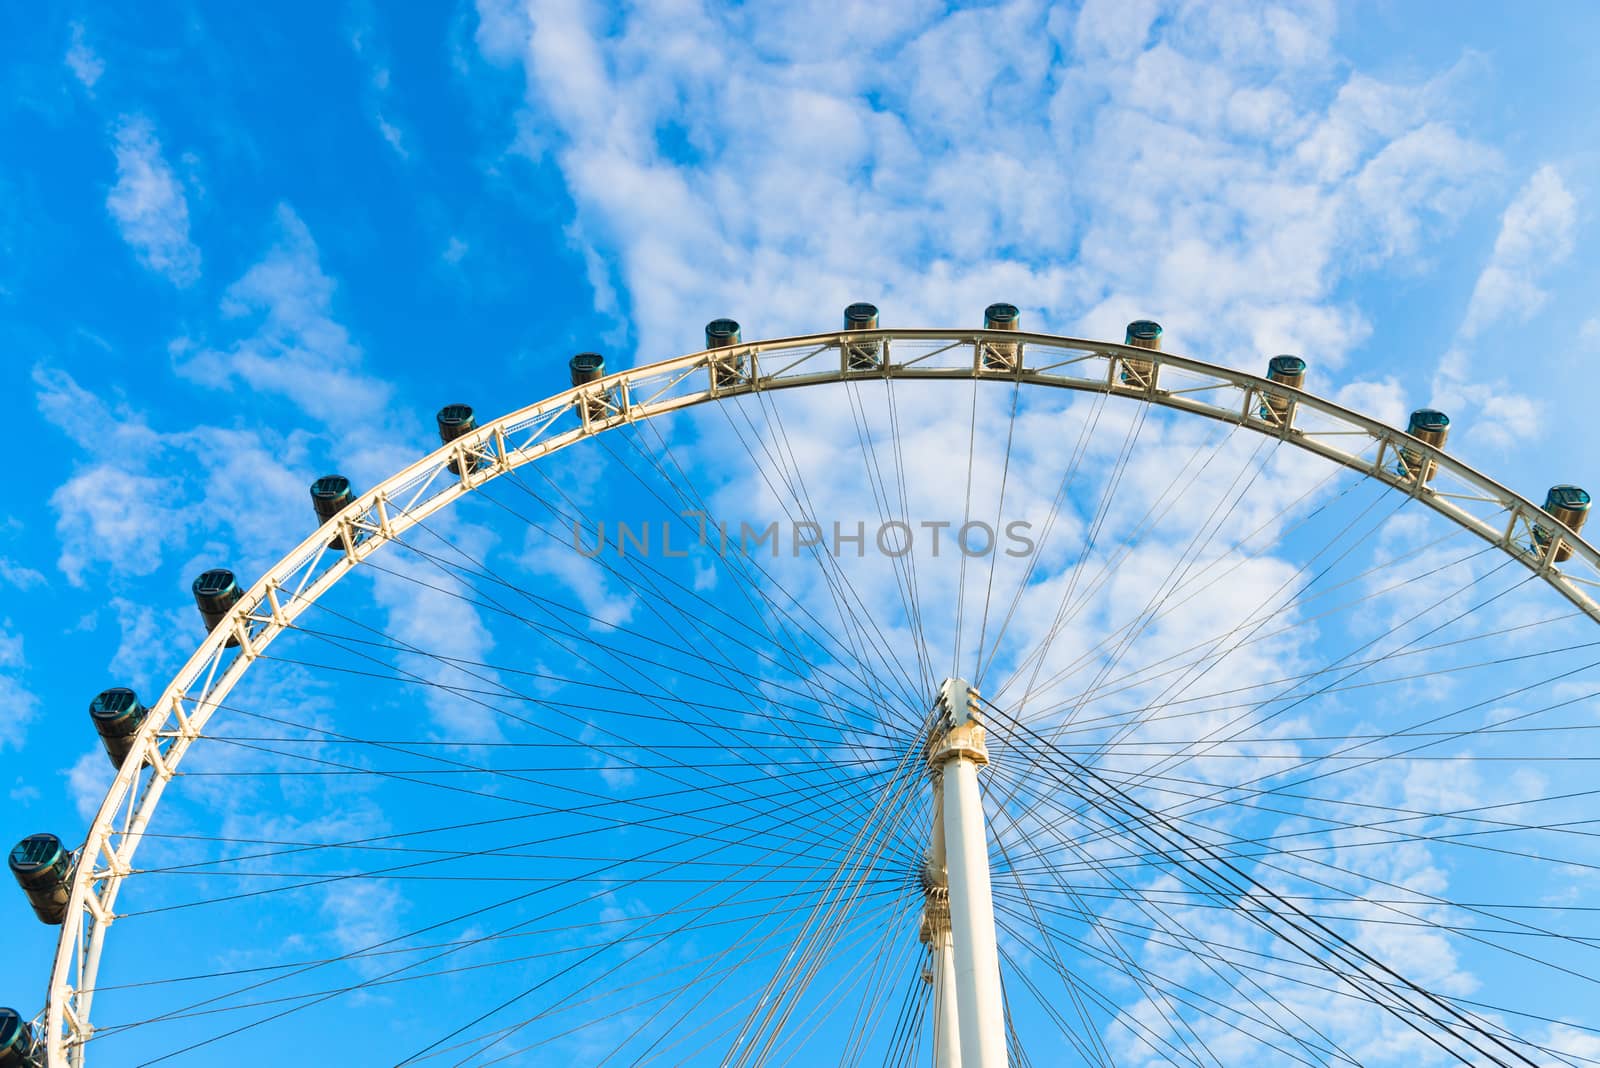 Big ferris wheel with cabin on blue sky with white clouds